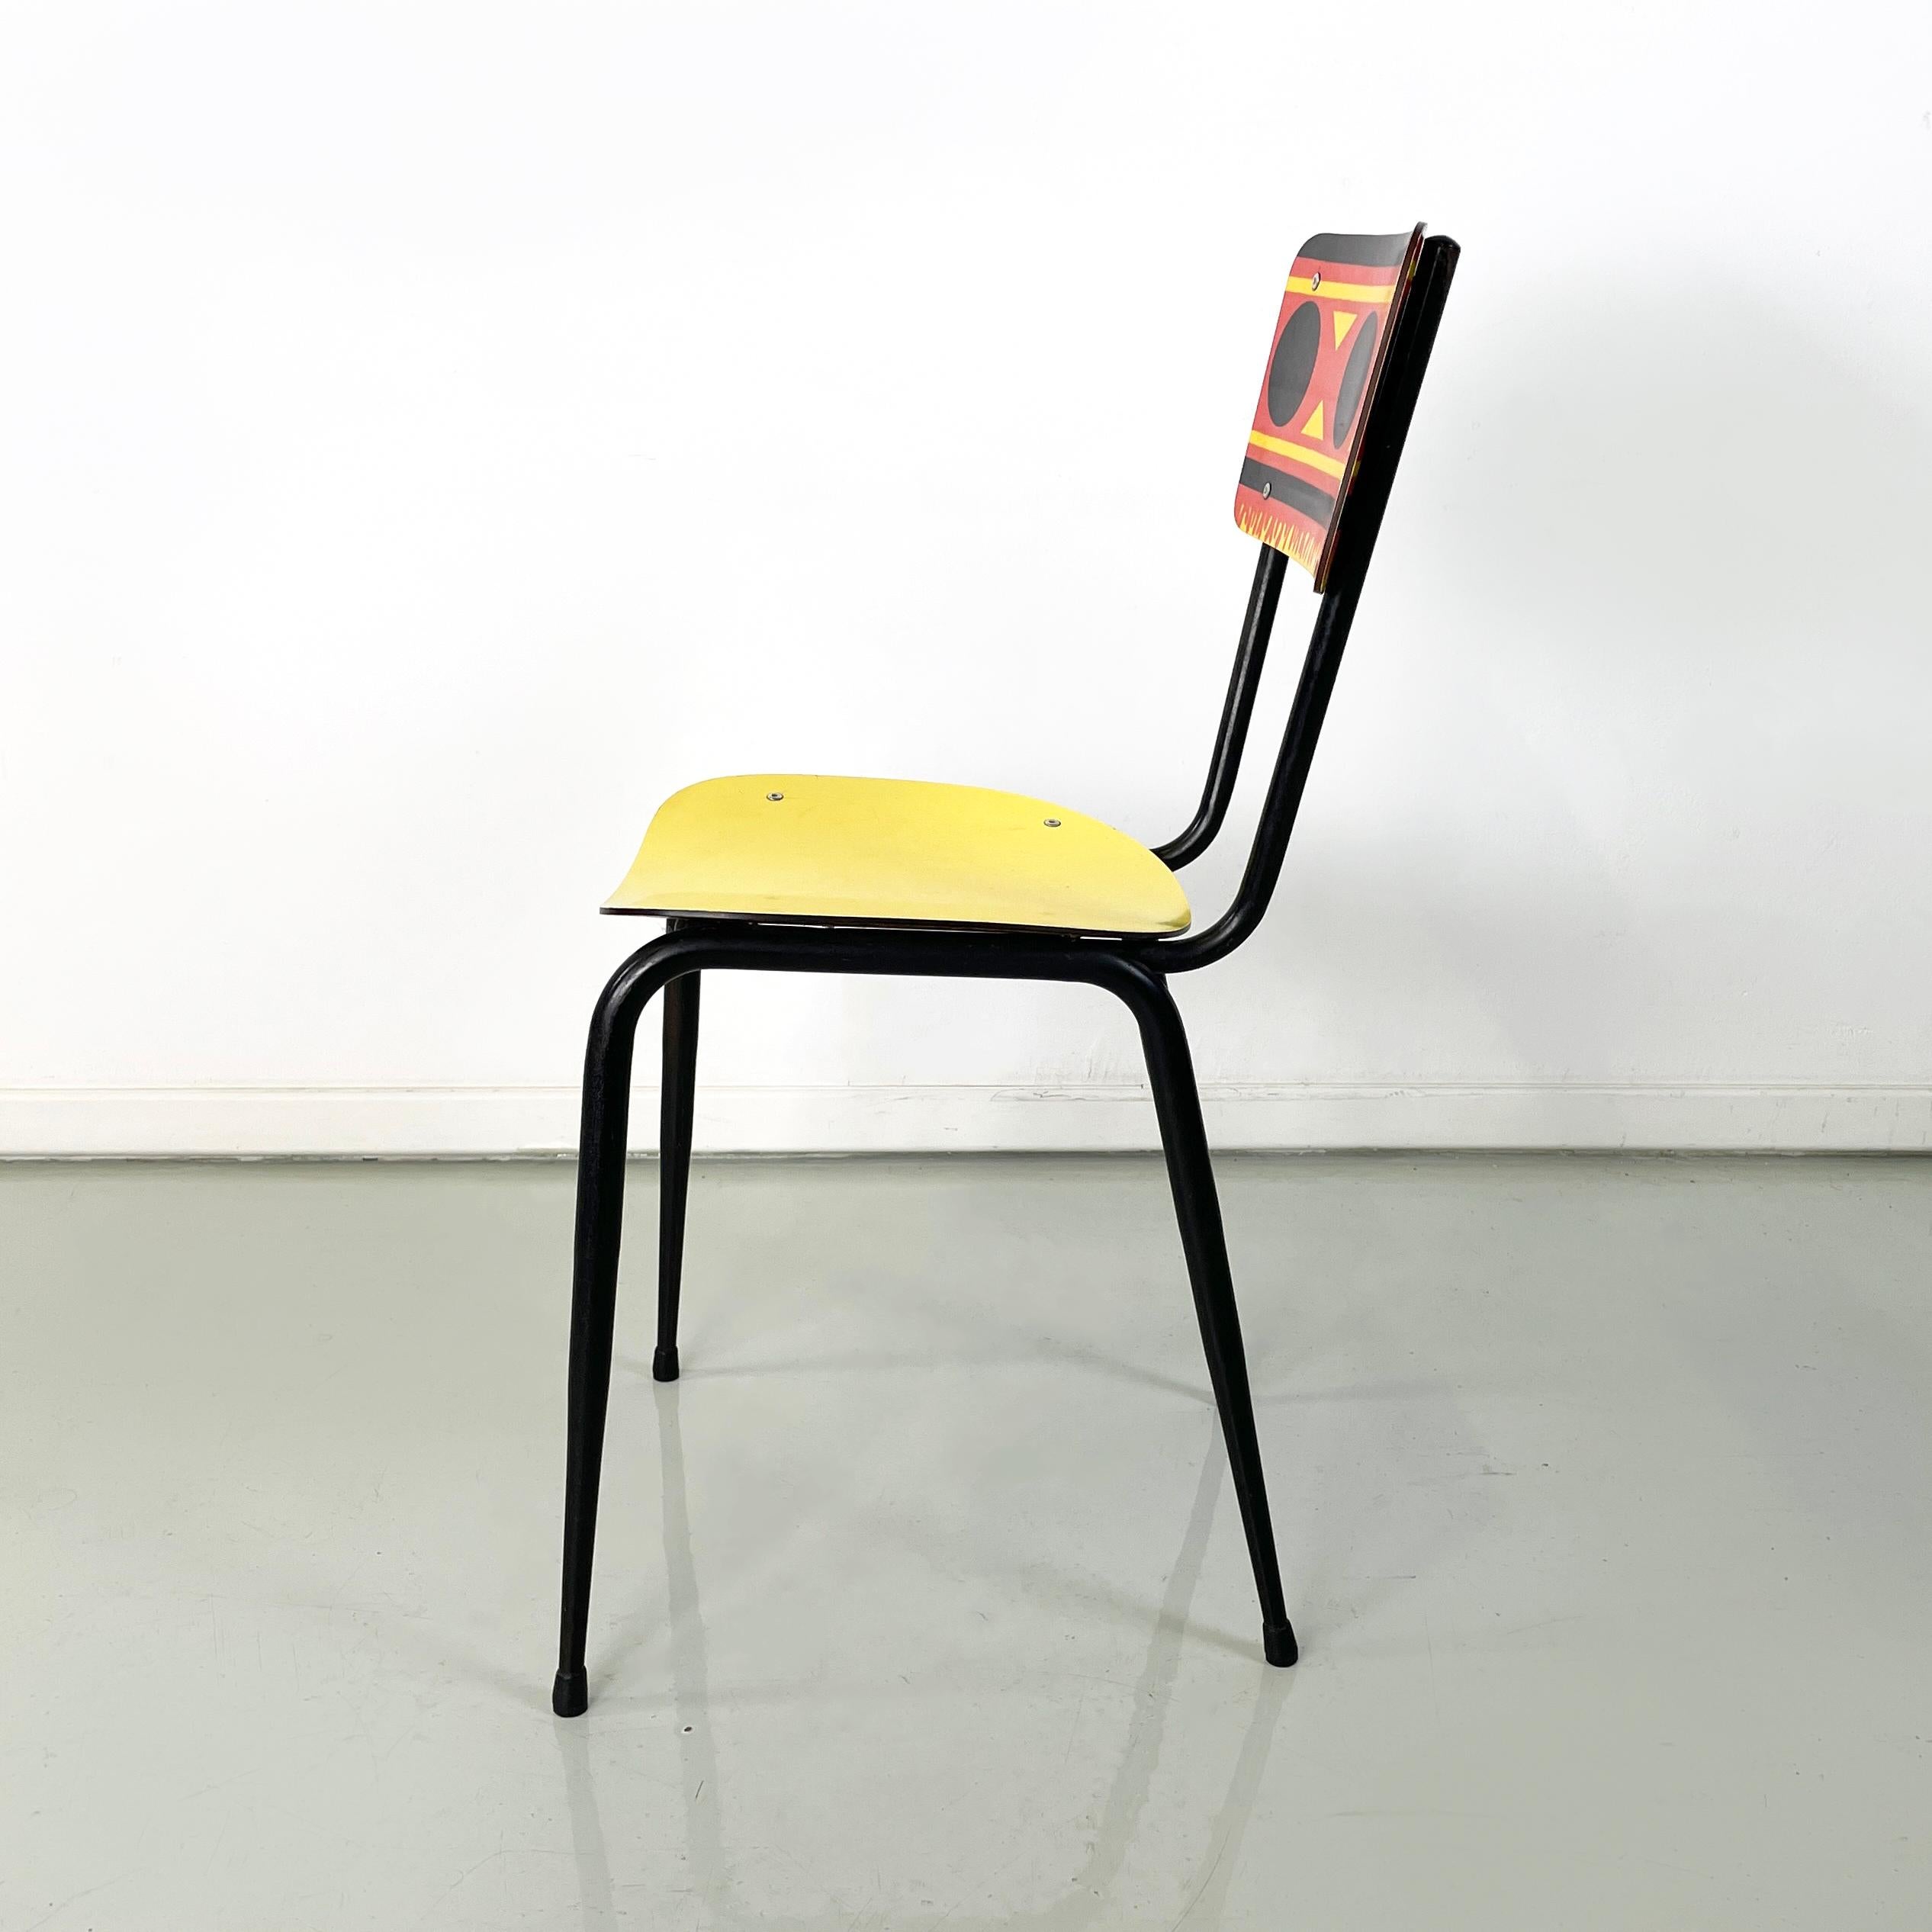 Mid-20th Century Italian mid-century Chairs Paulista in yellow, red, black formica metal, 1960s For Sale